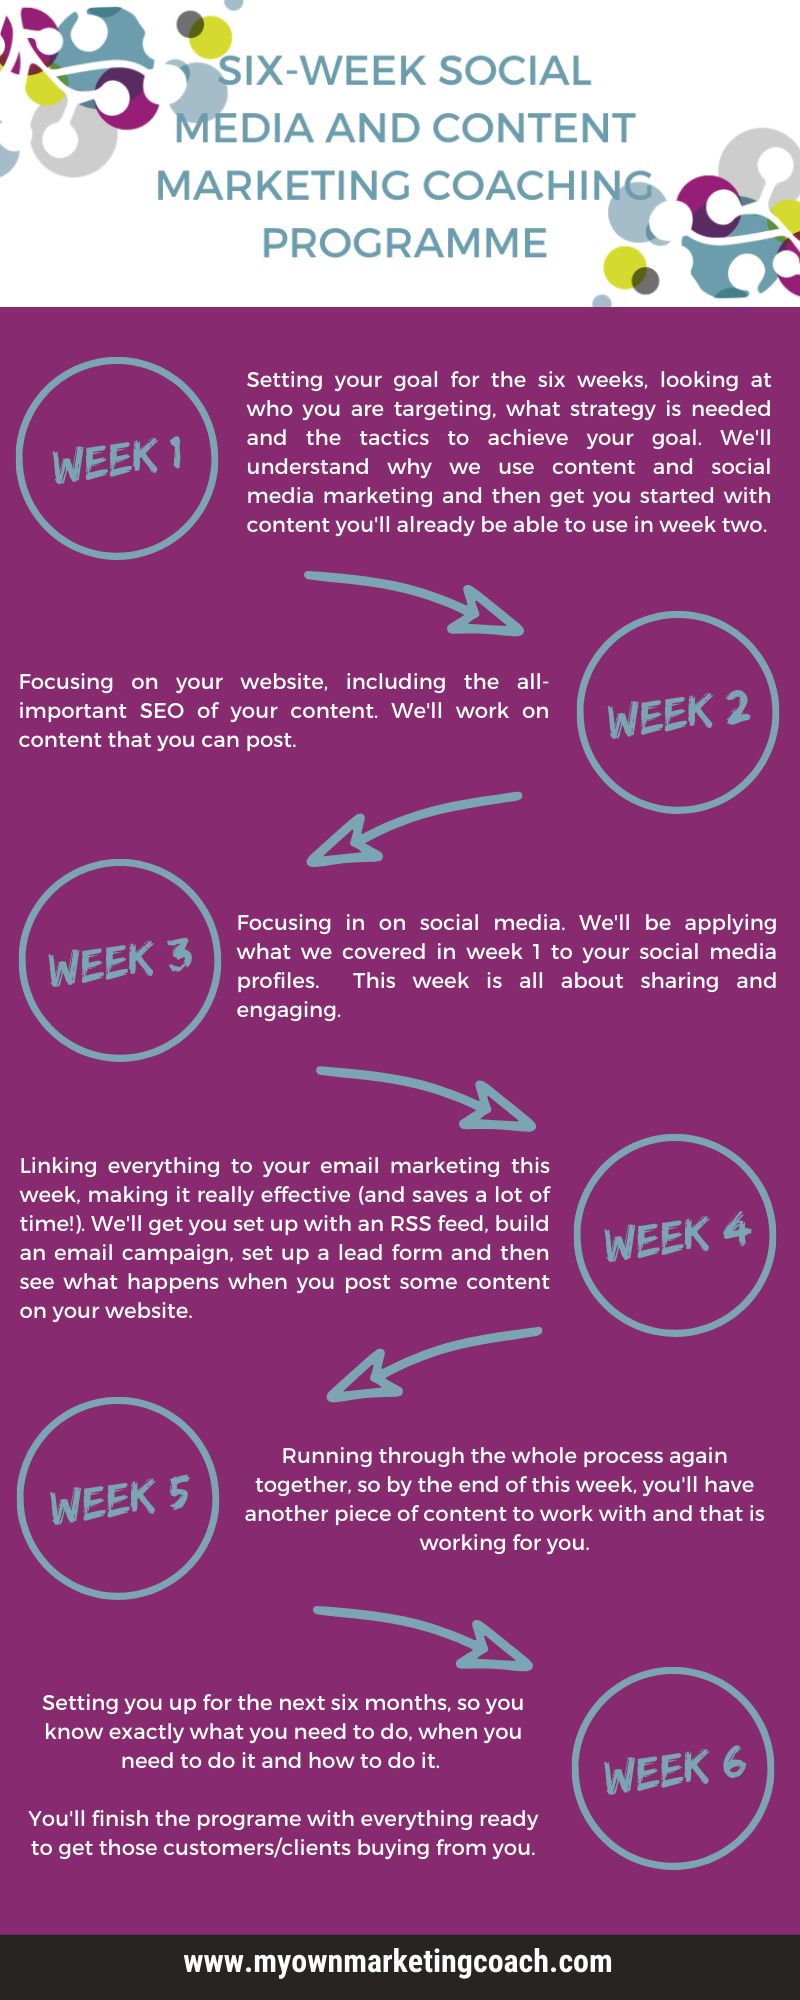 Six-week social media and content marketing coaching programme - My Own Marketing Coach